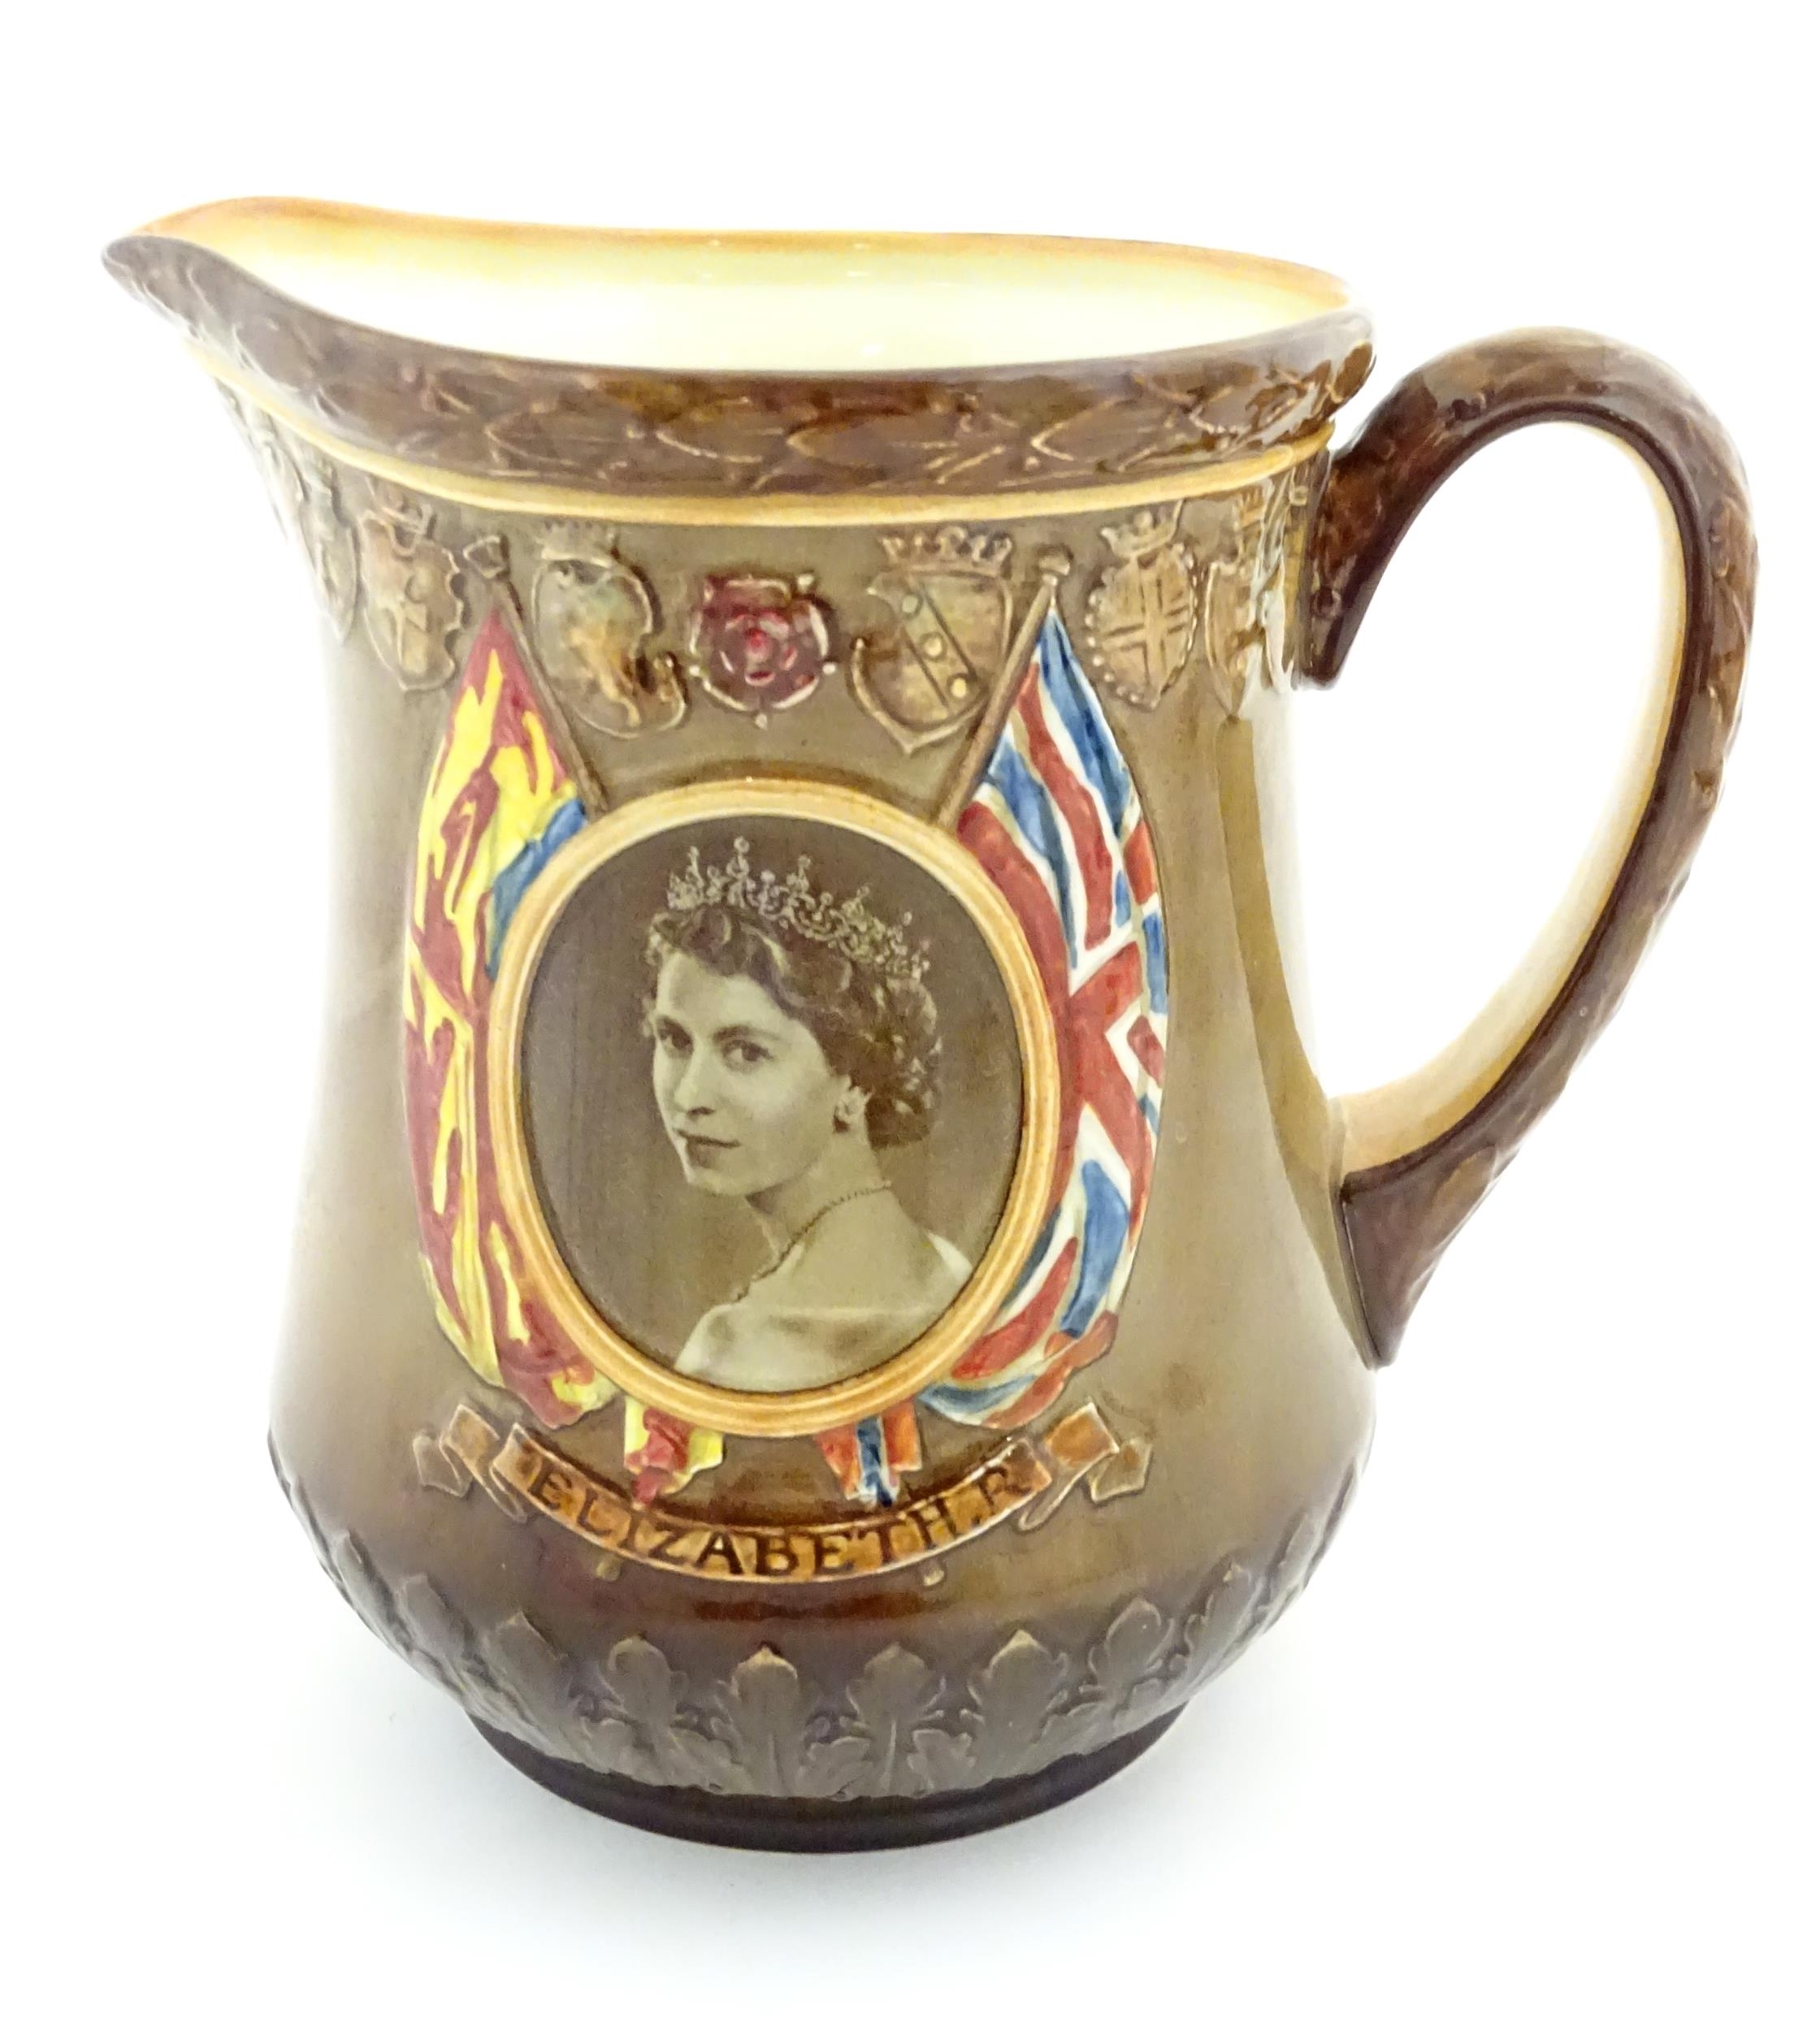 A Royal Doulton jug commemorating the Coronation of Queen Elizabeth II at Westminster Abbey, June